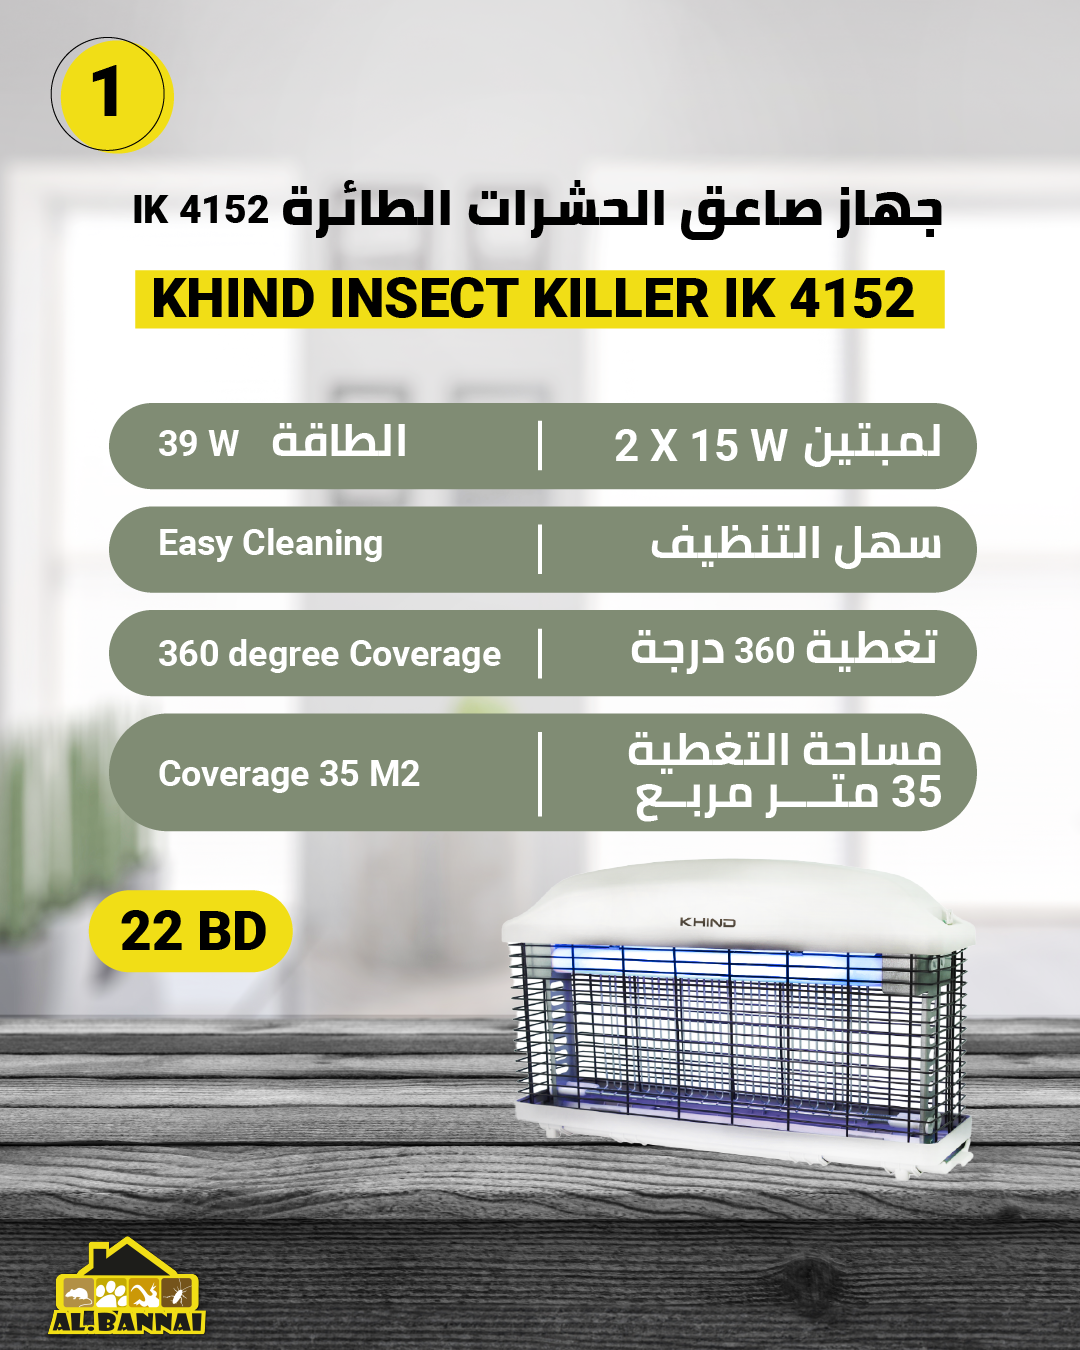 KHIND INSECT KILLER